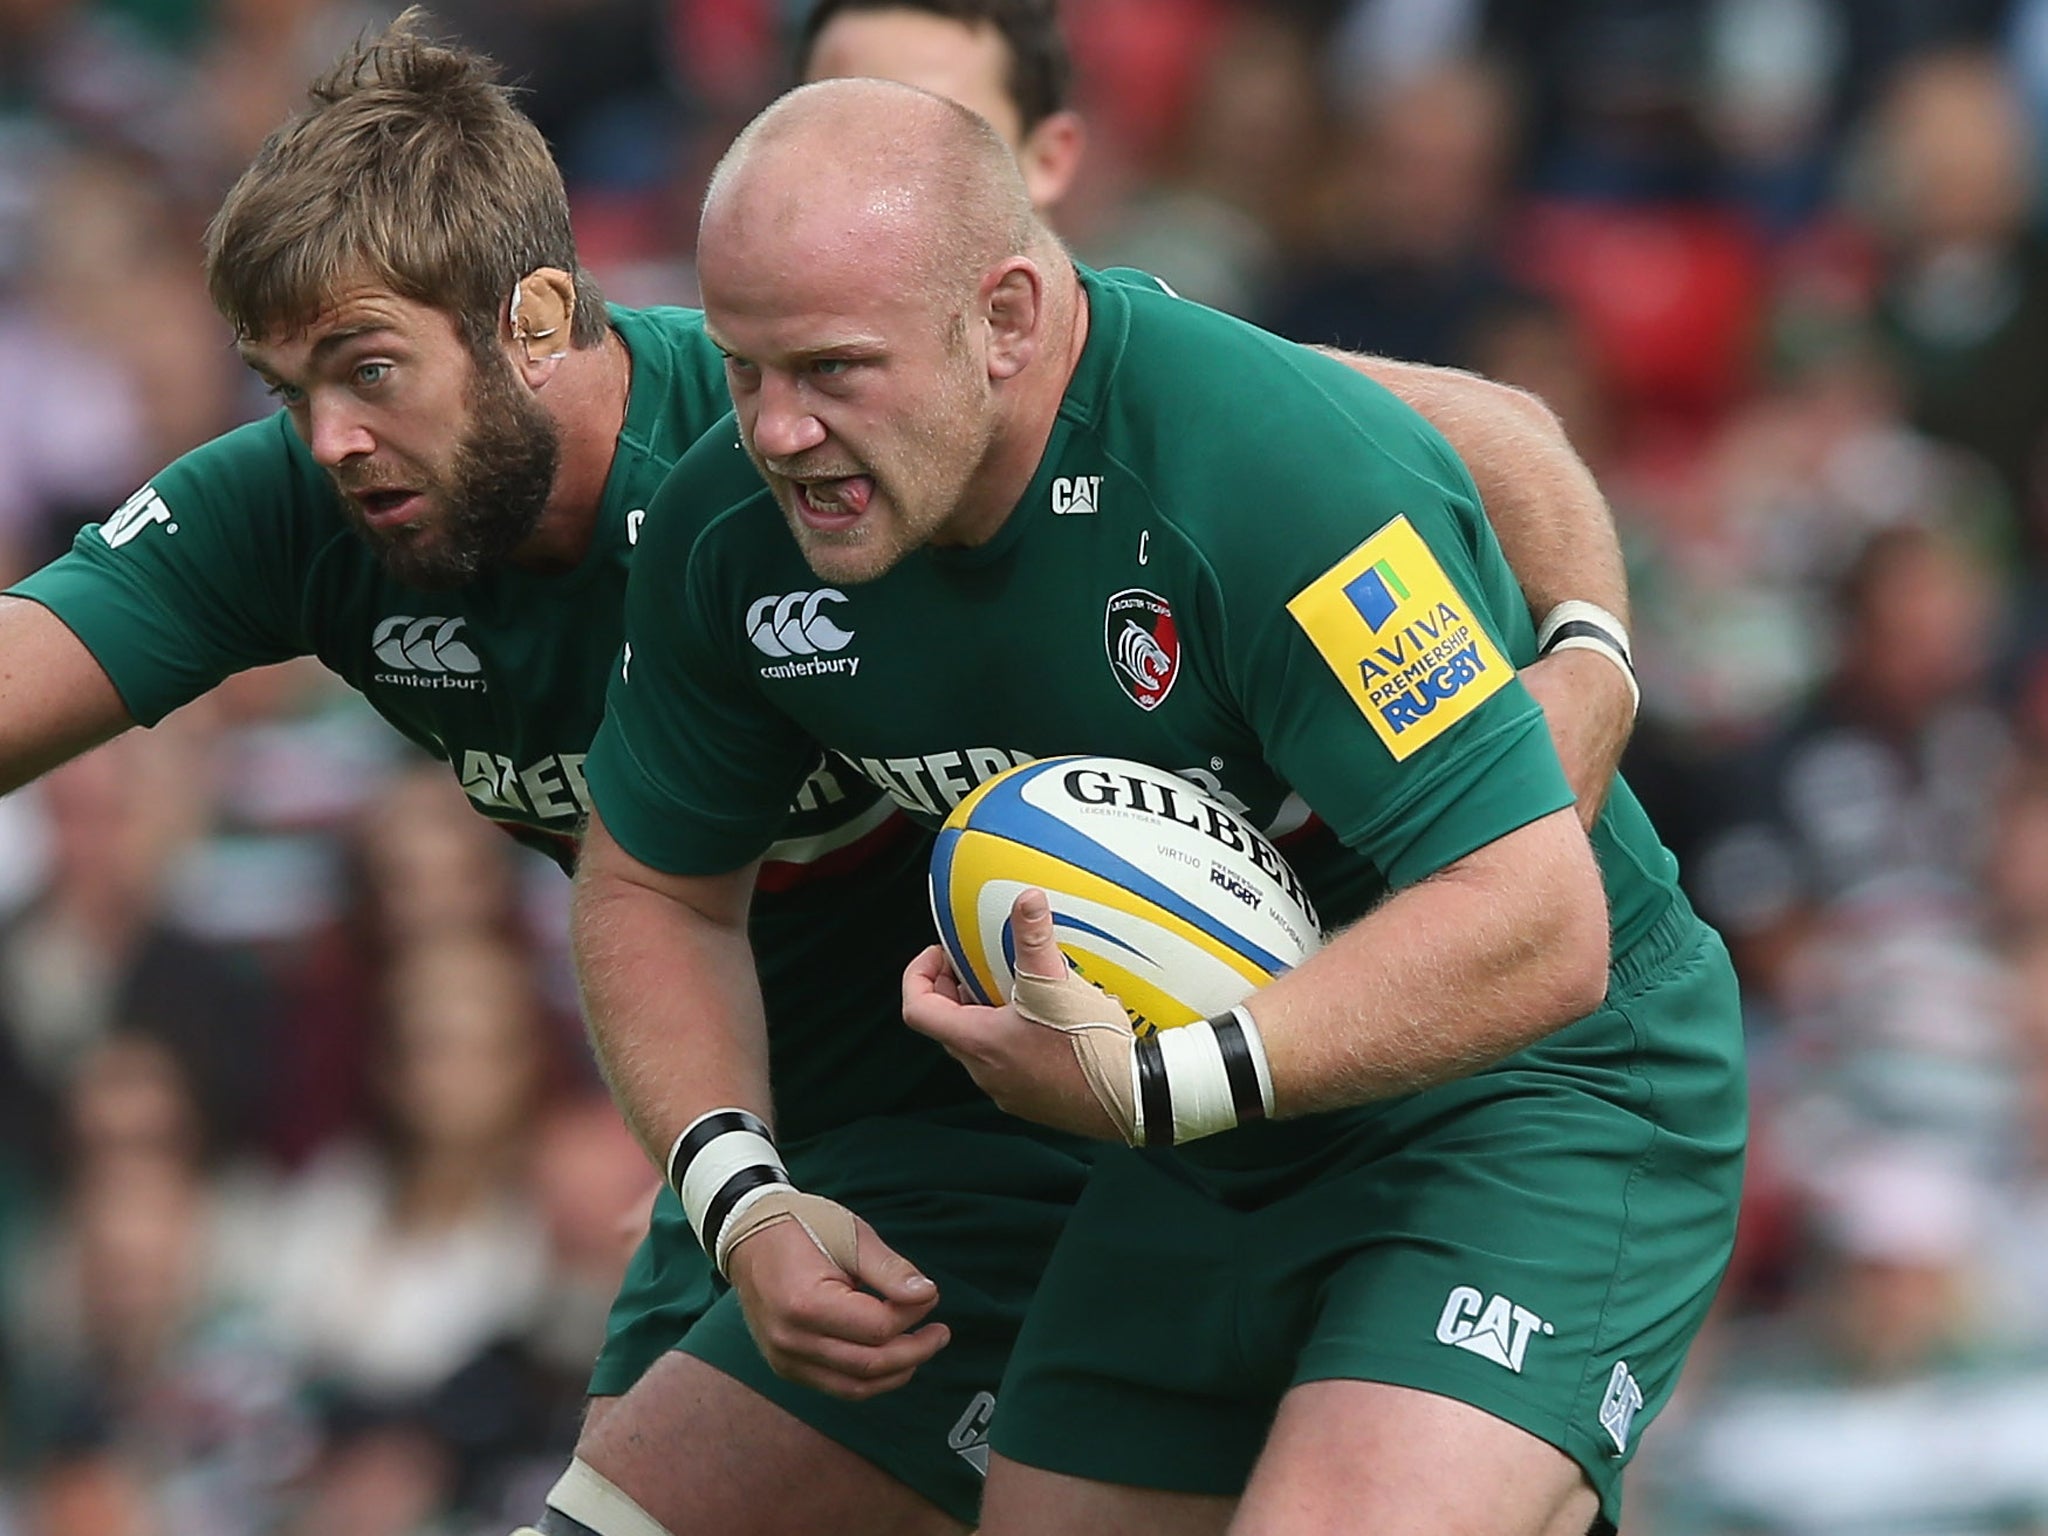 Dan Cole (R), alongside Leicester Tigers and England team-mate Geoff Parling (L), has been cleared of biting in the Aviva Premiership match against Worcester Warriors